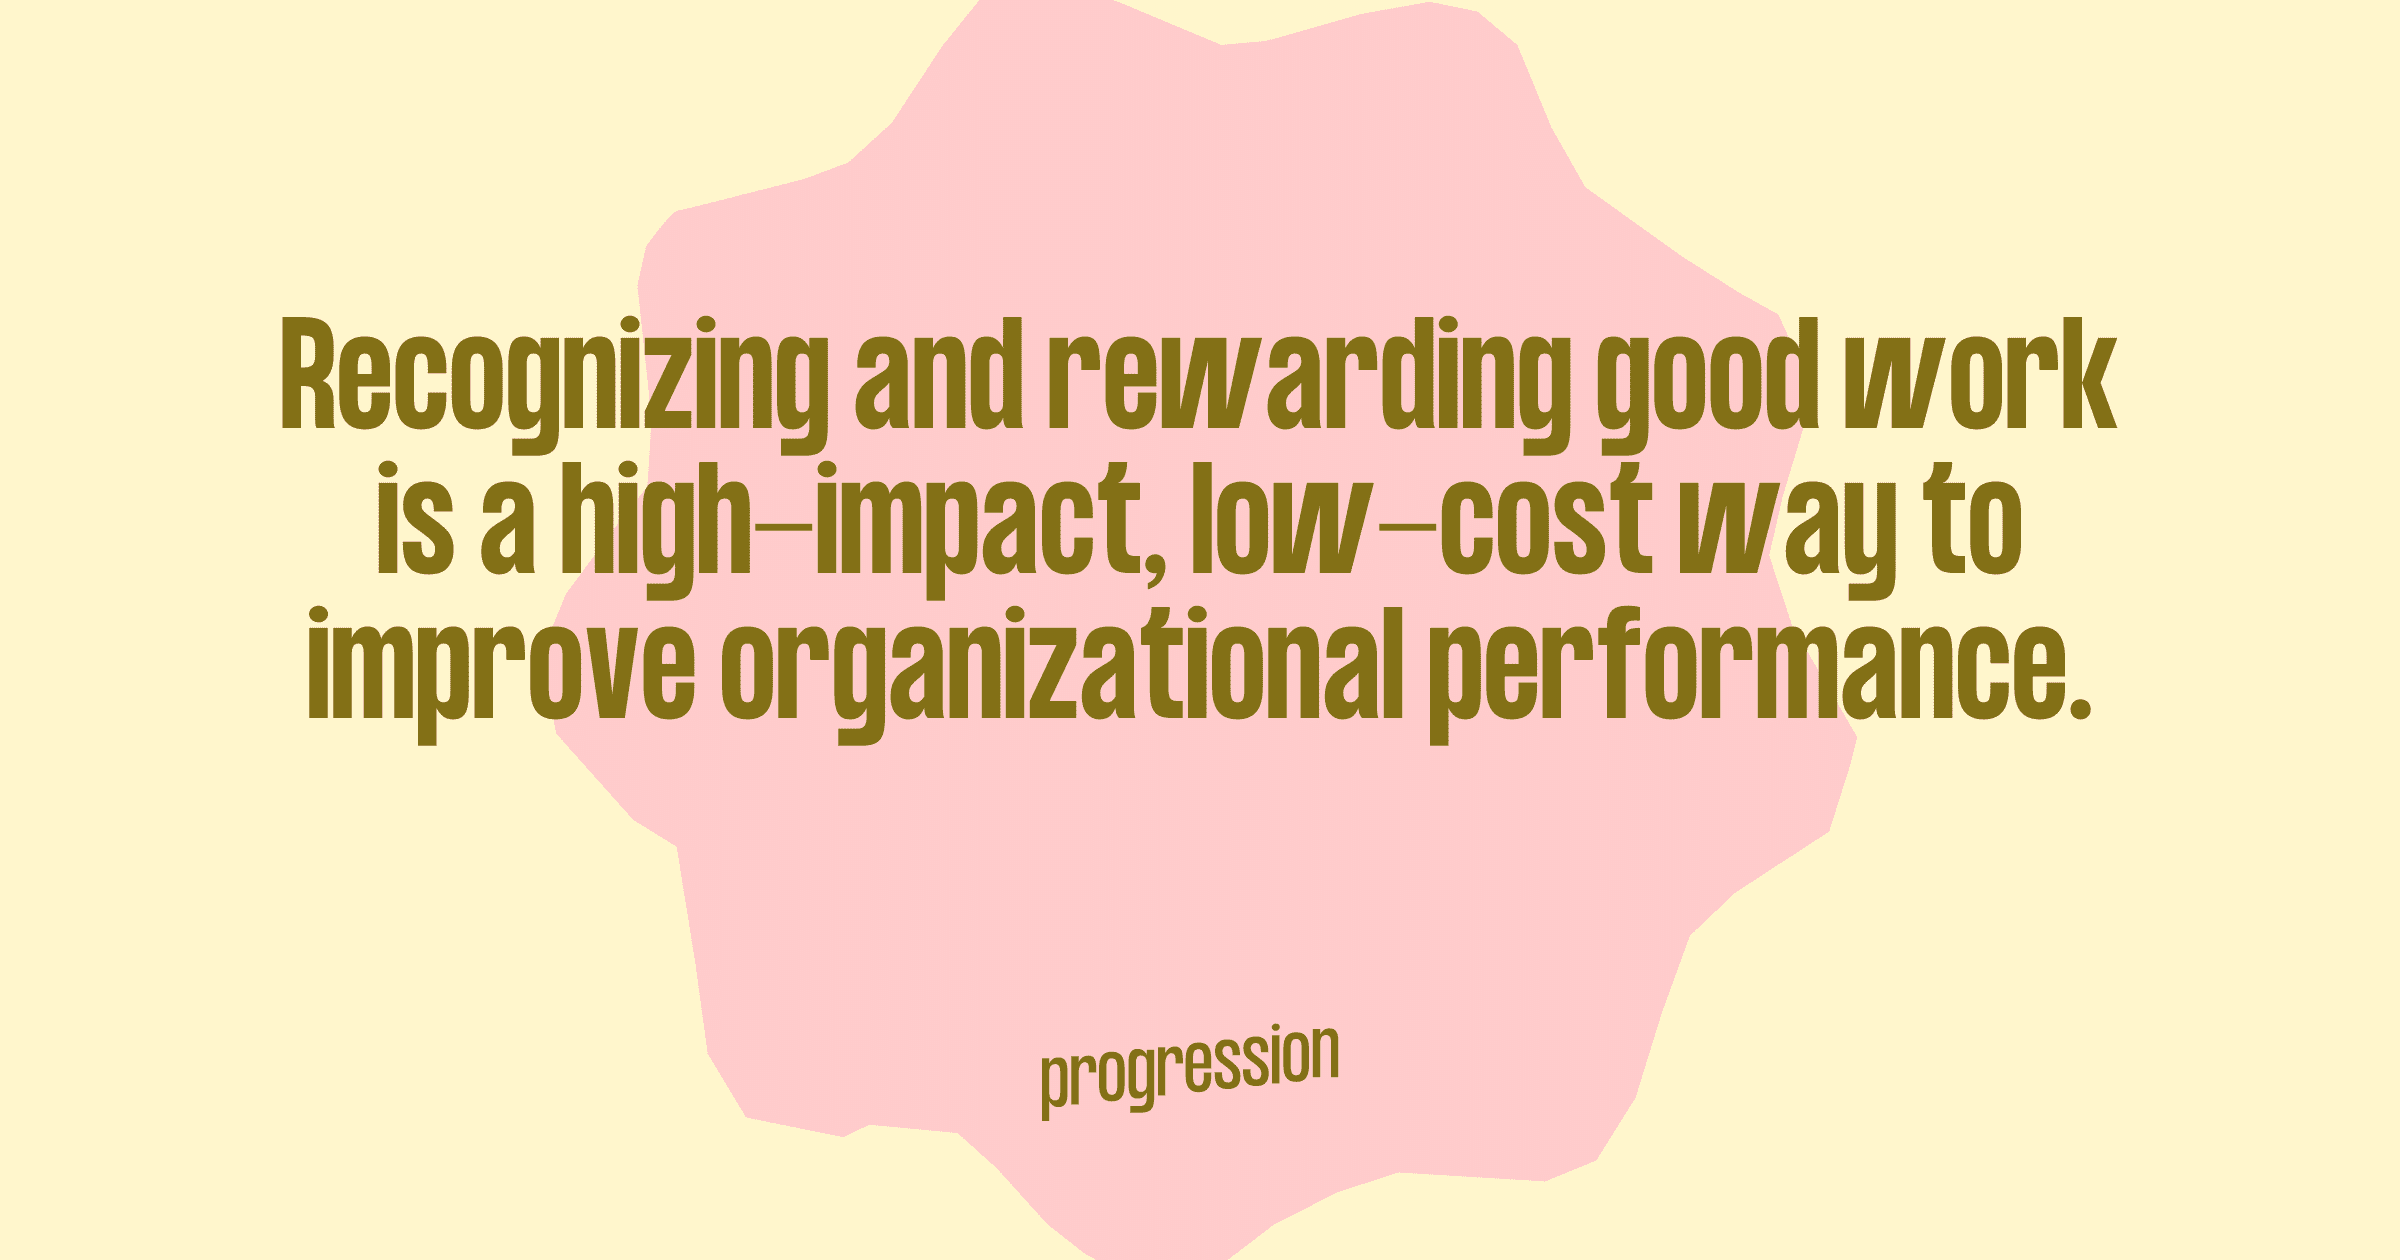 Graphic highlighting how recognizing and rewarding good work is a high-impact, low cost way to improve organizational performance